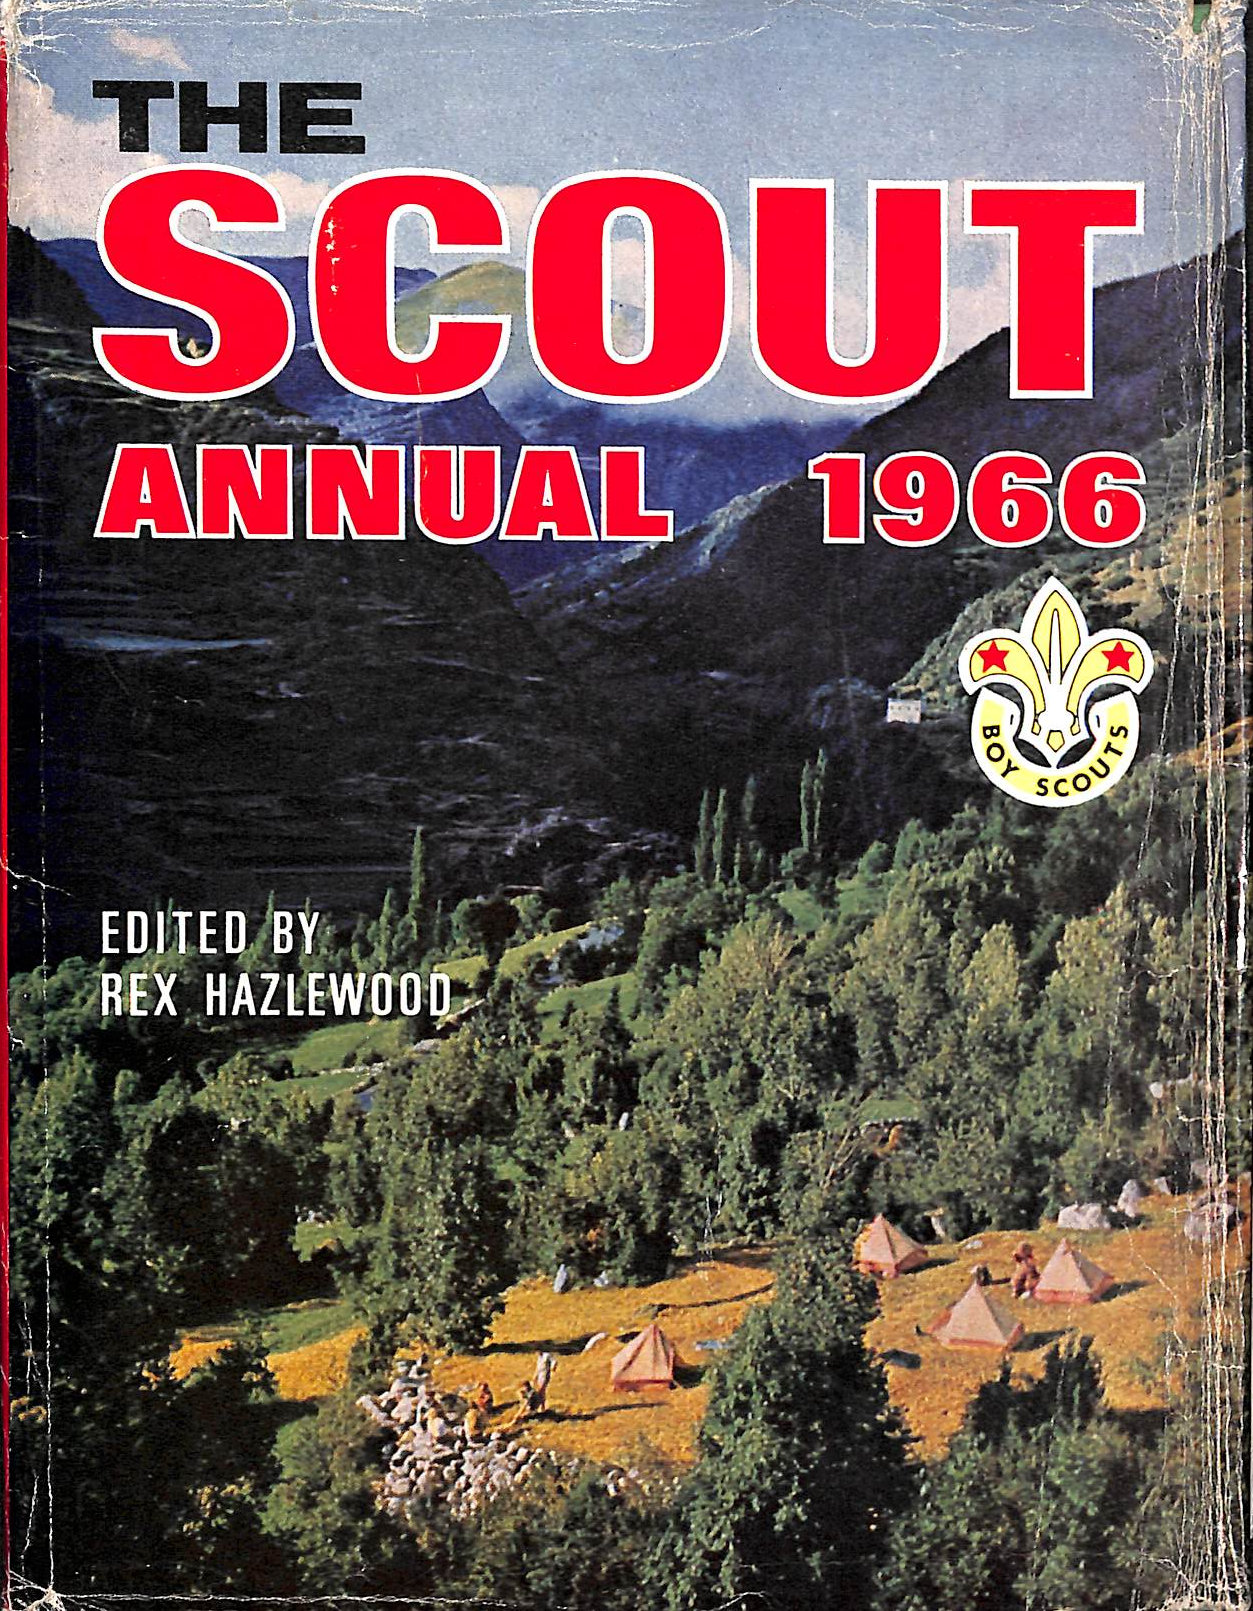 REX HAZLEWOOD [EDITOR] - The Scout Annual 1966